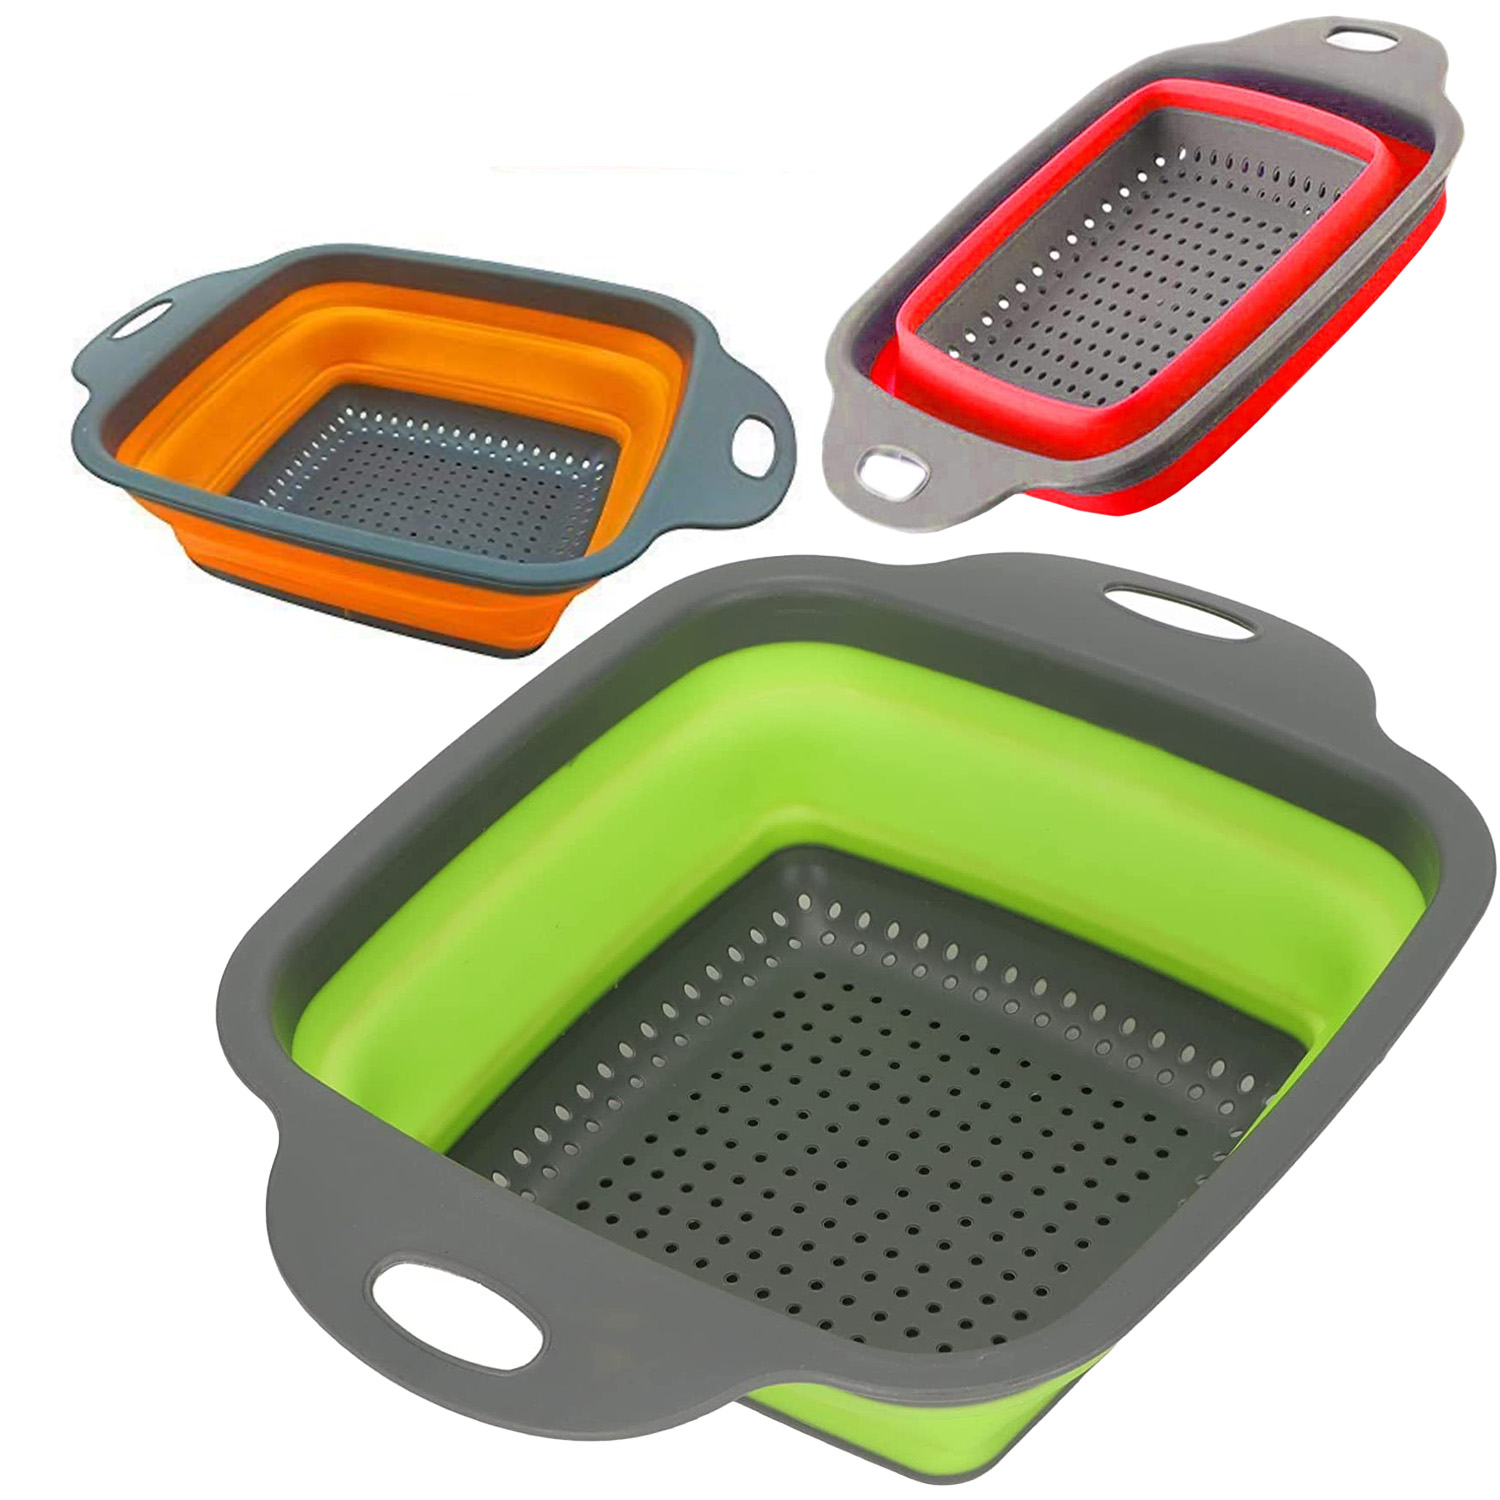 Colander Folding Draining Basket TPR plastic square Bowl For Fruits Vegetables Washing Strainer, Collapsible Silicon Strainers 